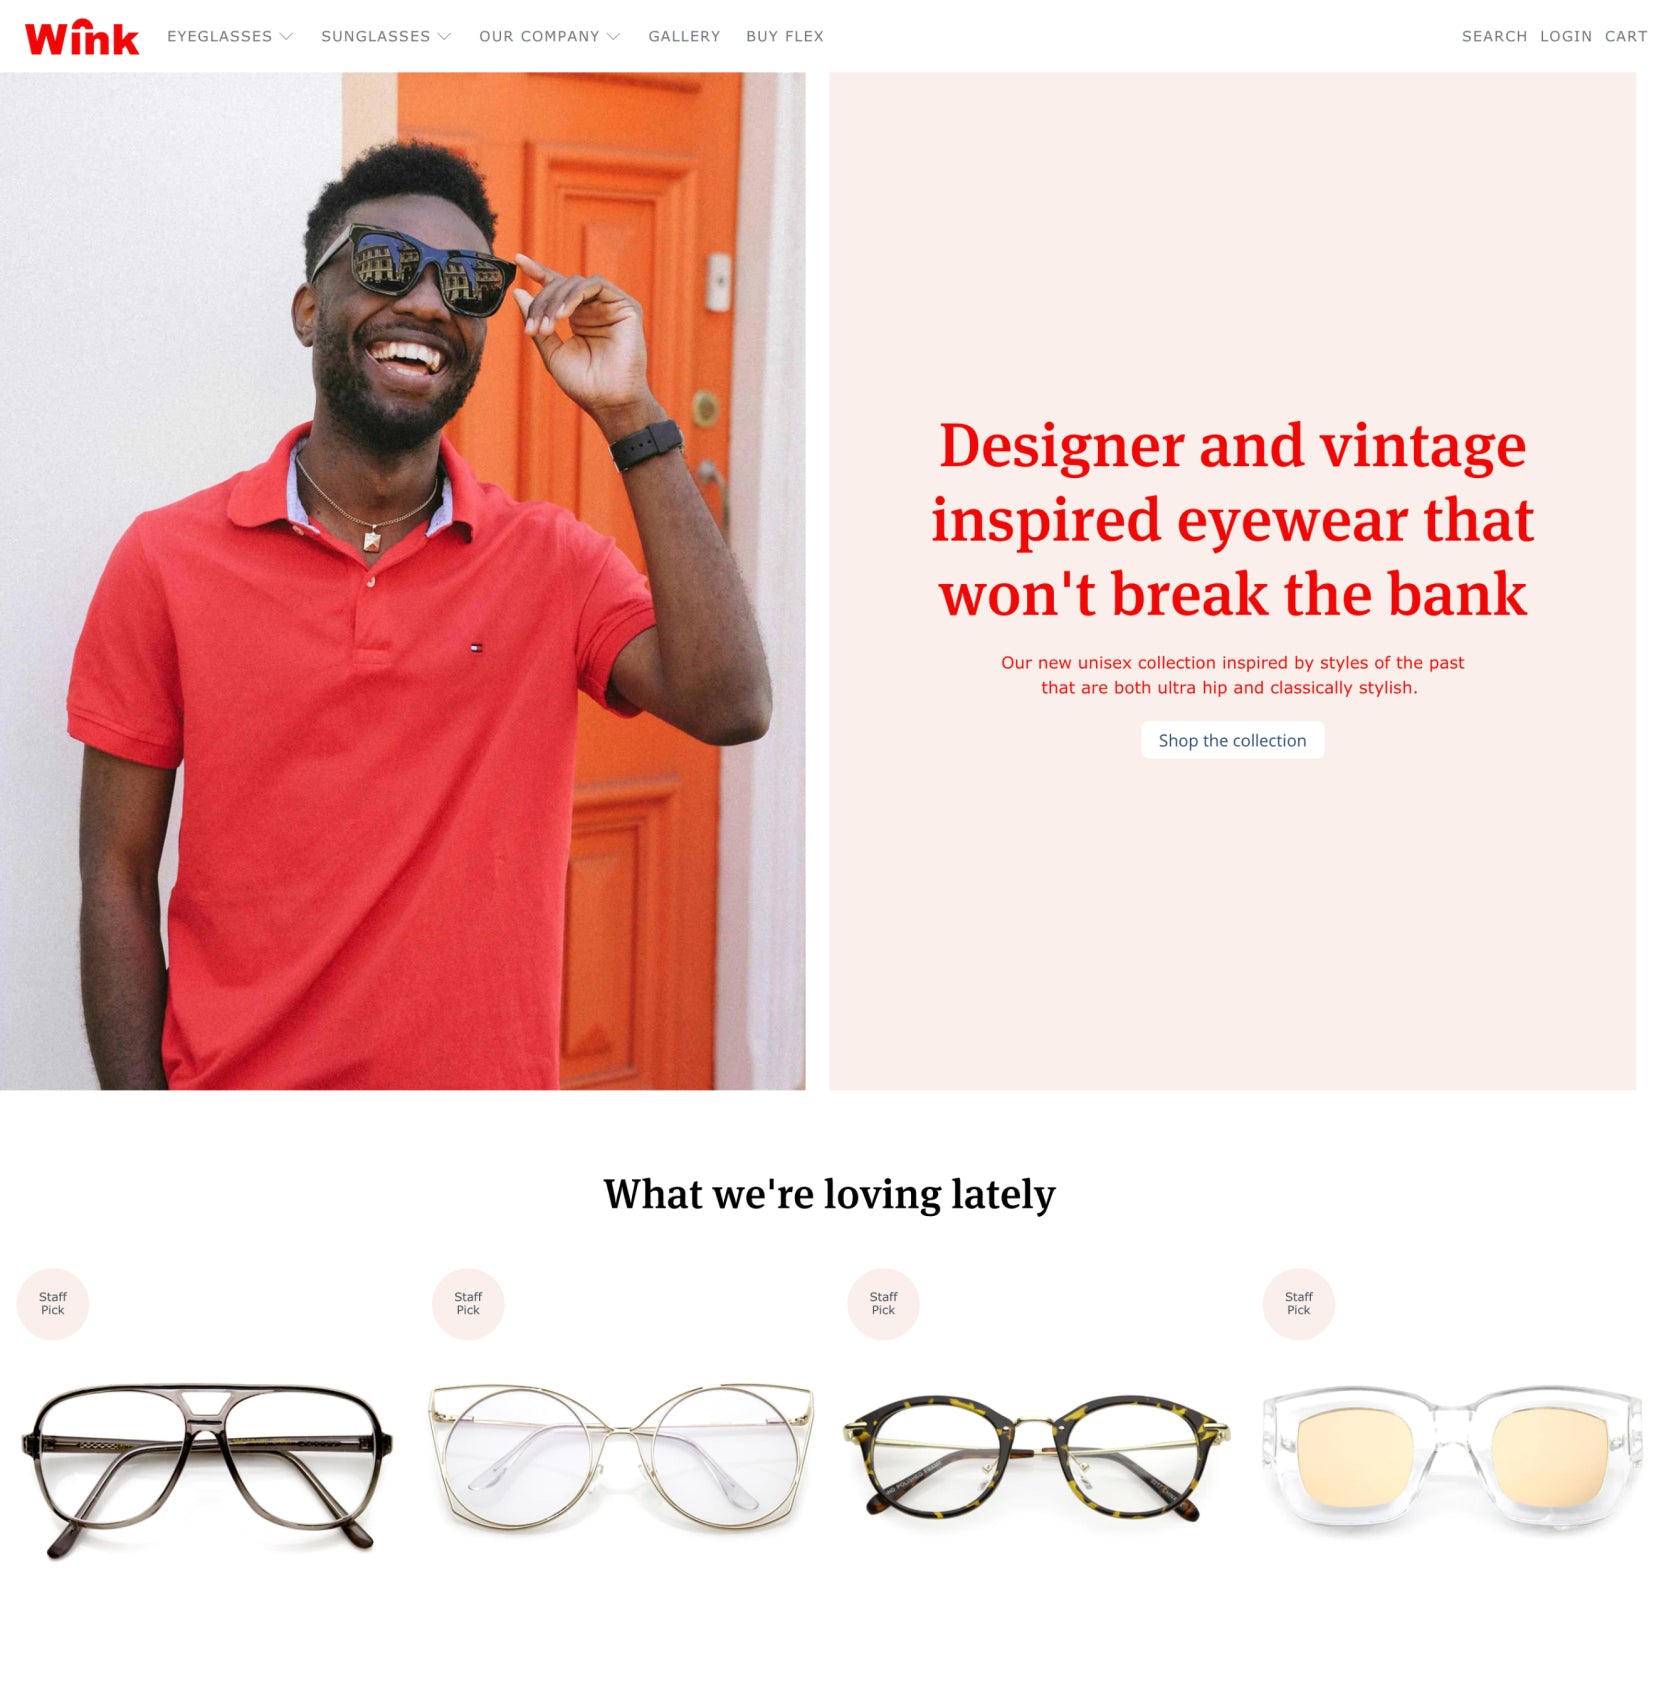 Screenshot of Flex Shopify theme by Out of the Sandbox. Screenshot shows an online glasses store with a man smiling wearing sunglasses and 4 glasses frames products.